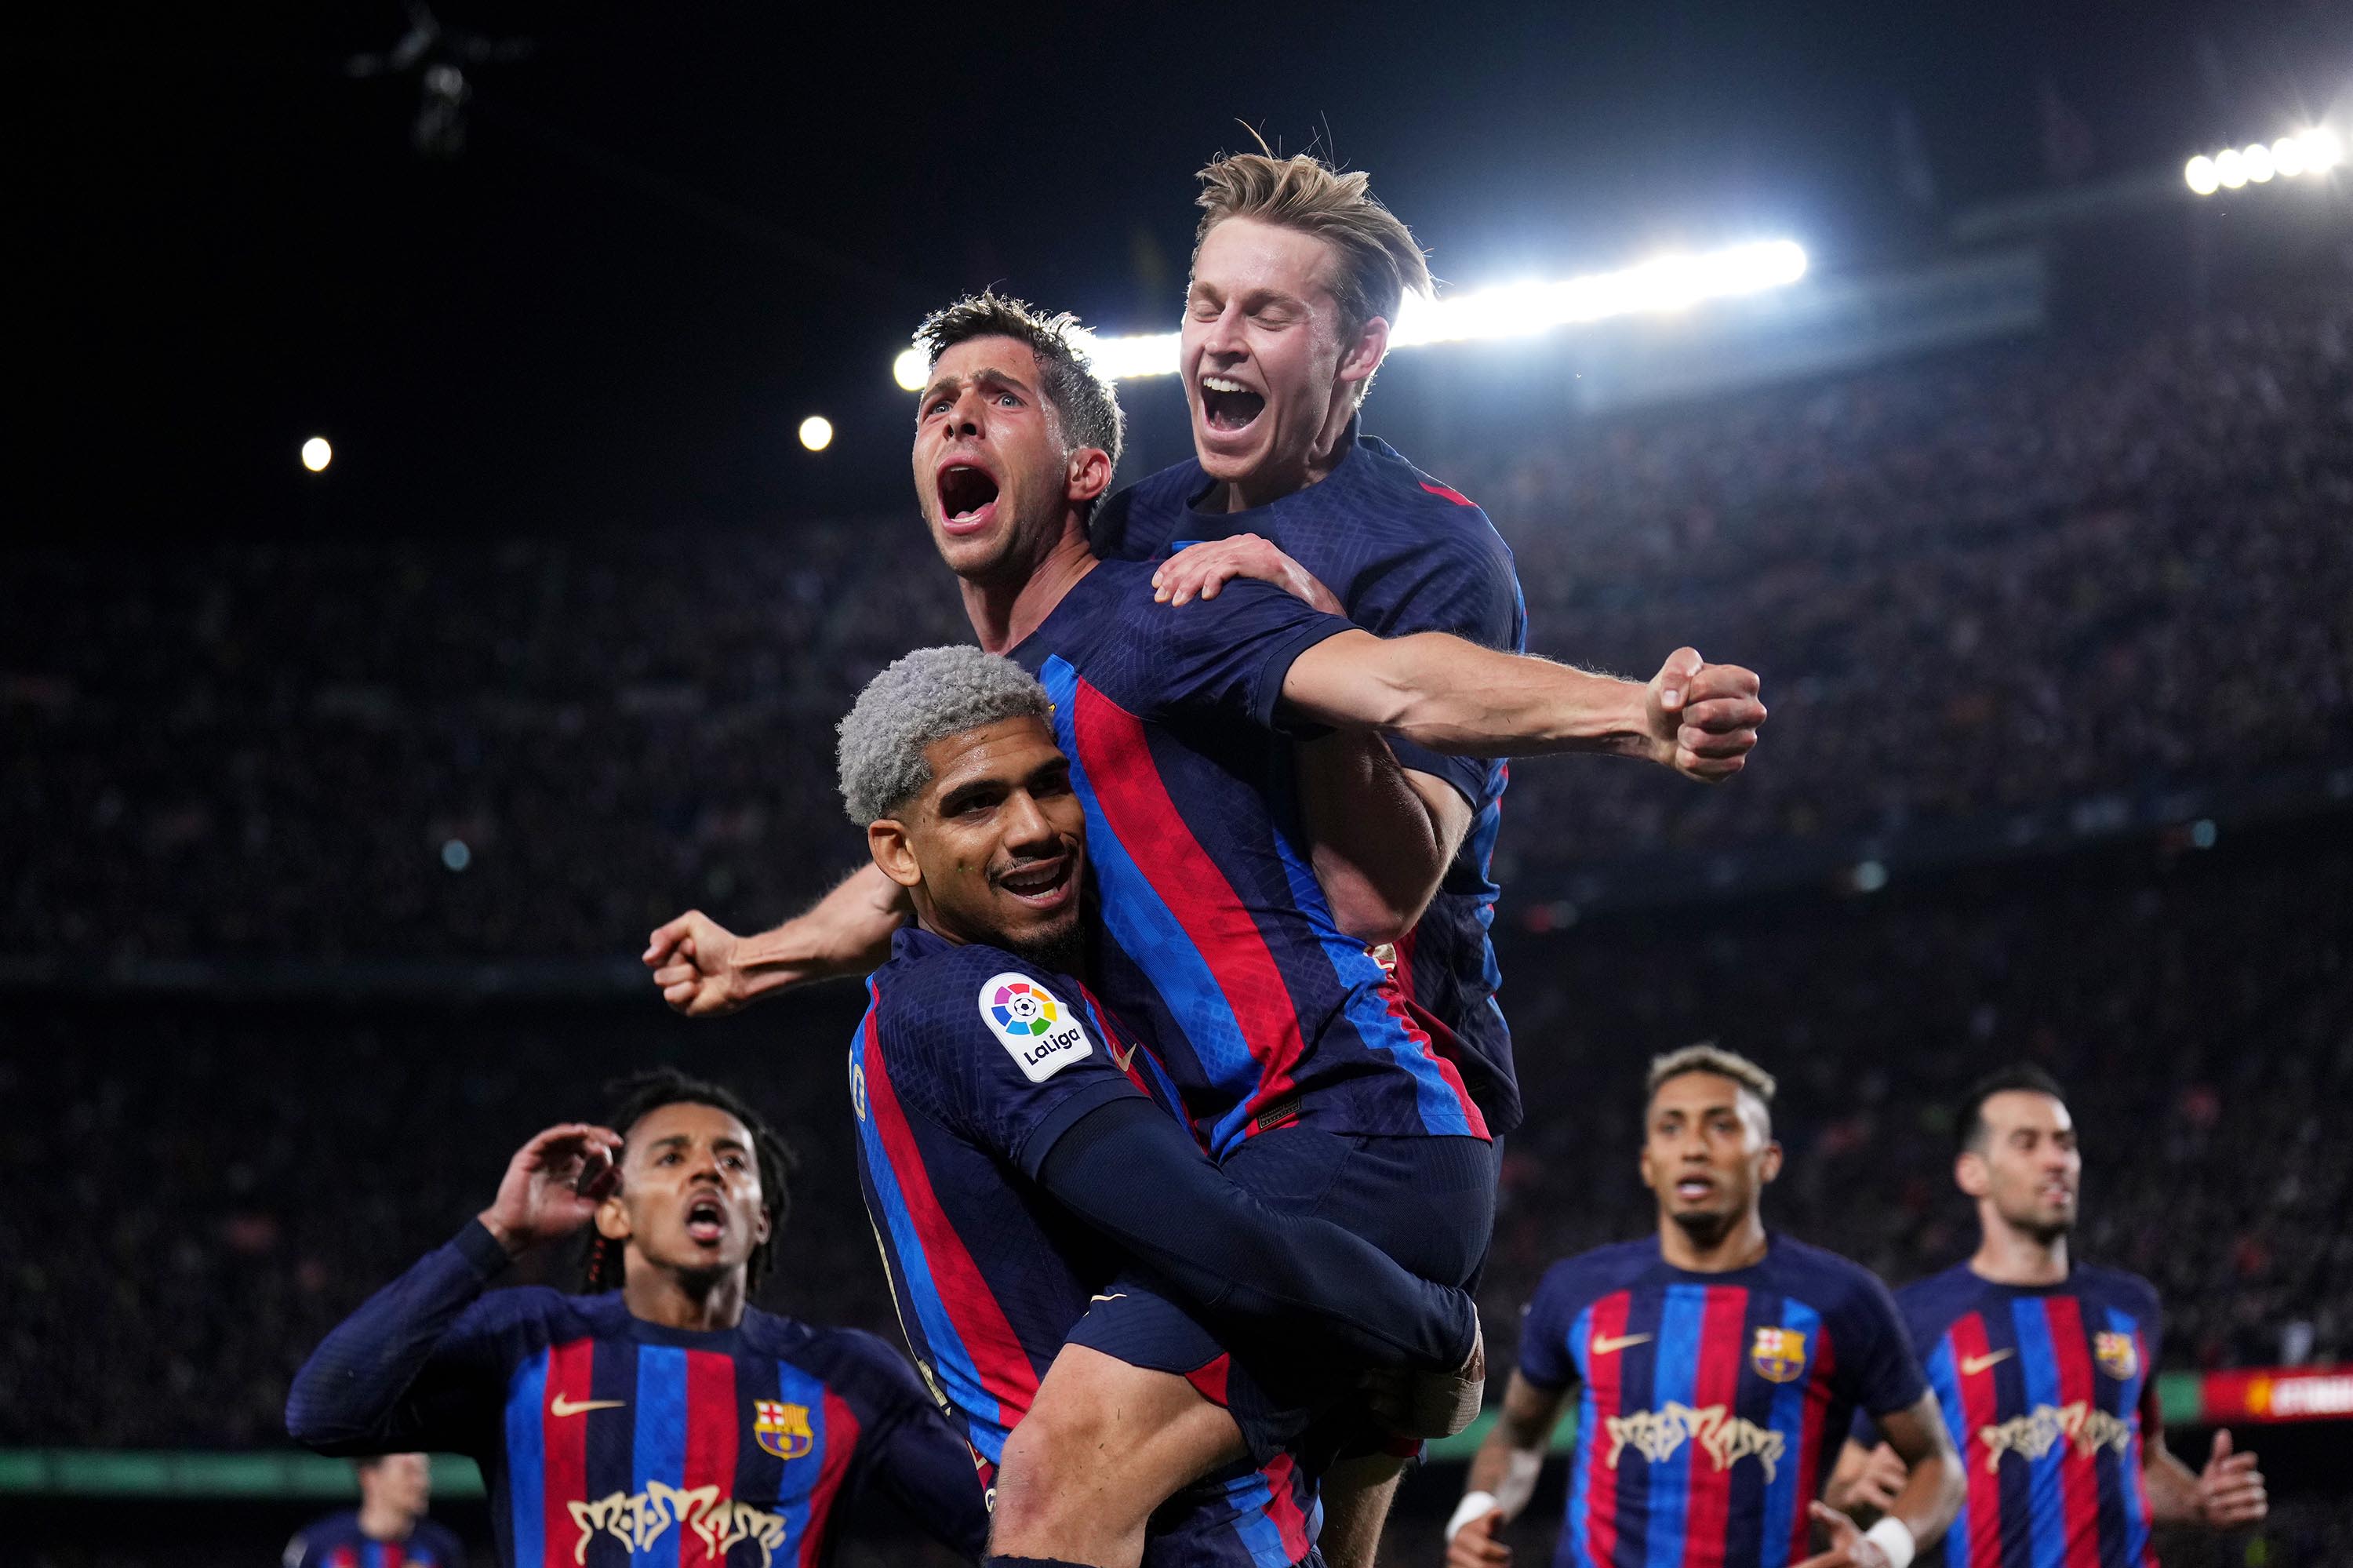 Barcelona Secures Dramatic El Clásico Win To Move 12 Points Clear Of